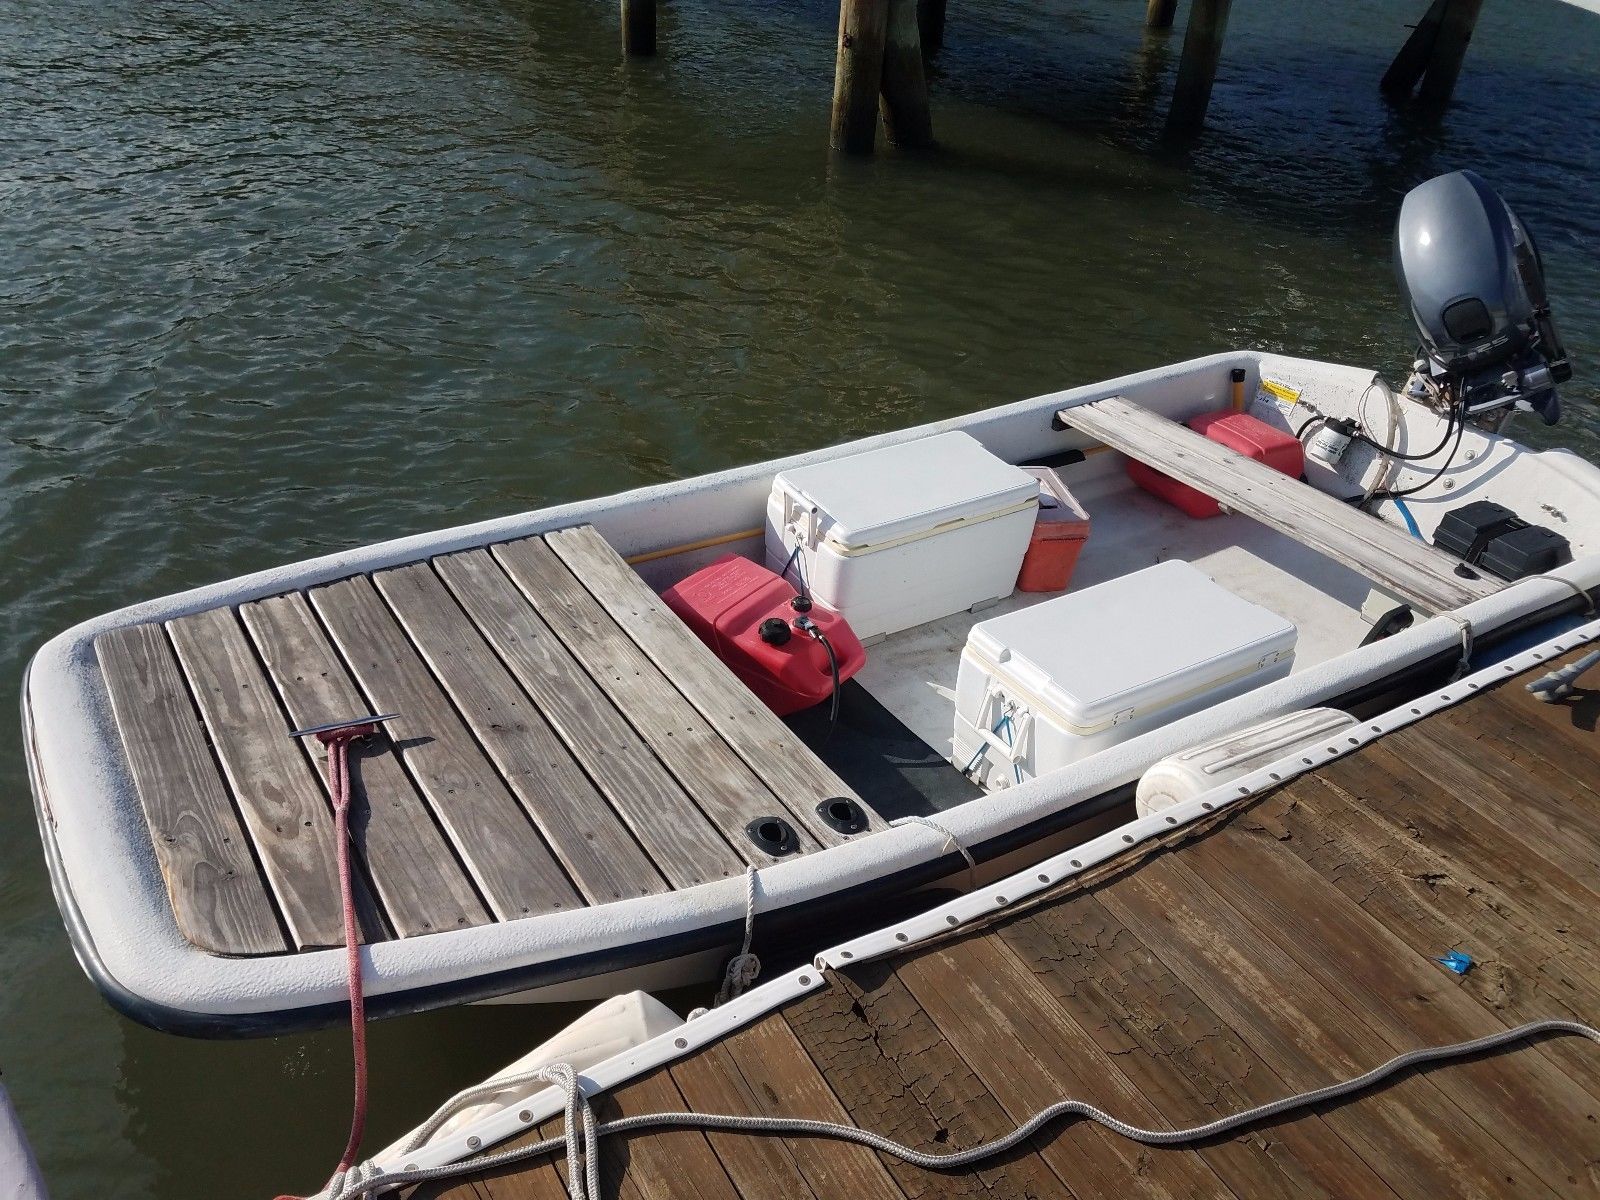 Carolina Skiff J14 2015 for sale for $5,250 - Boats-from ...